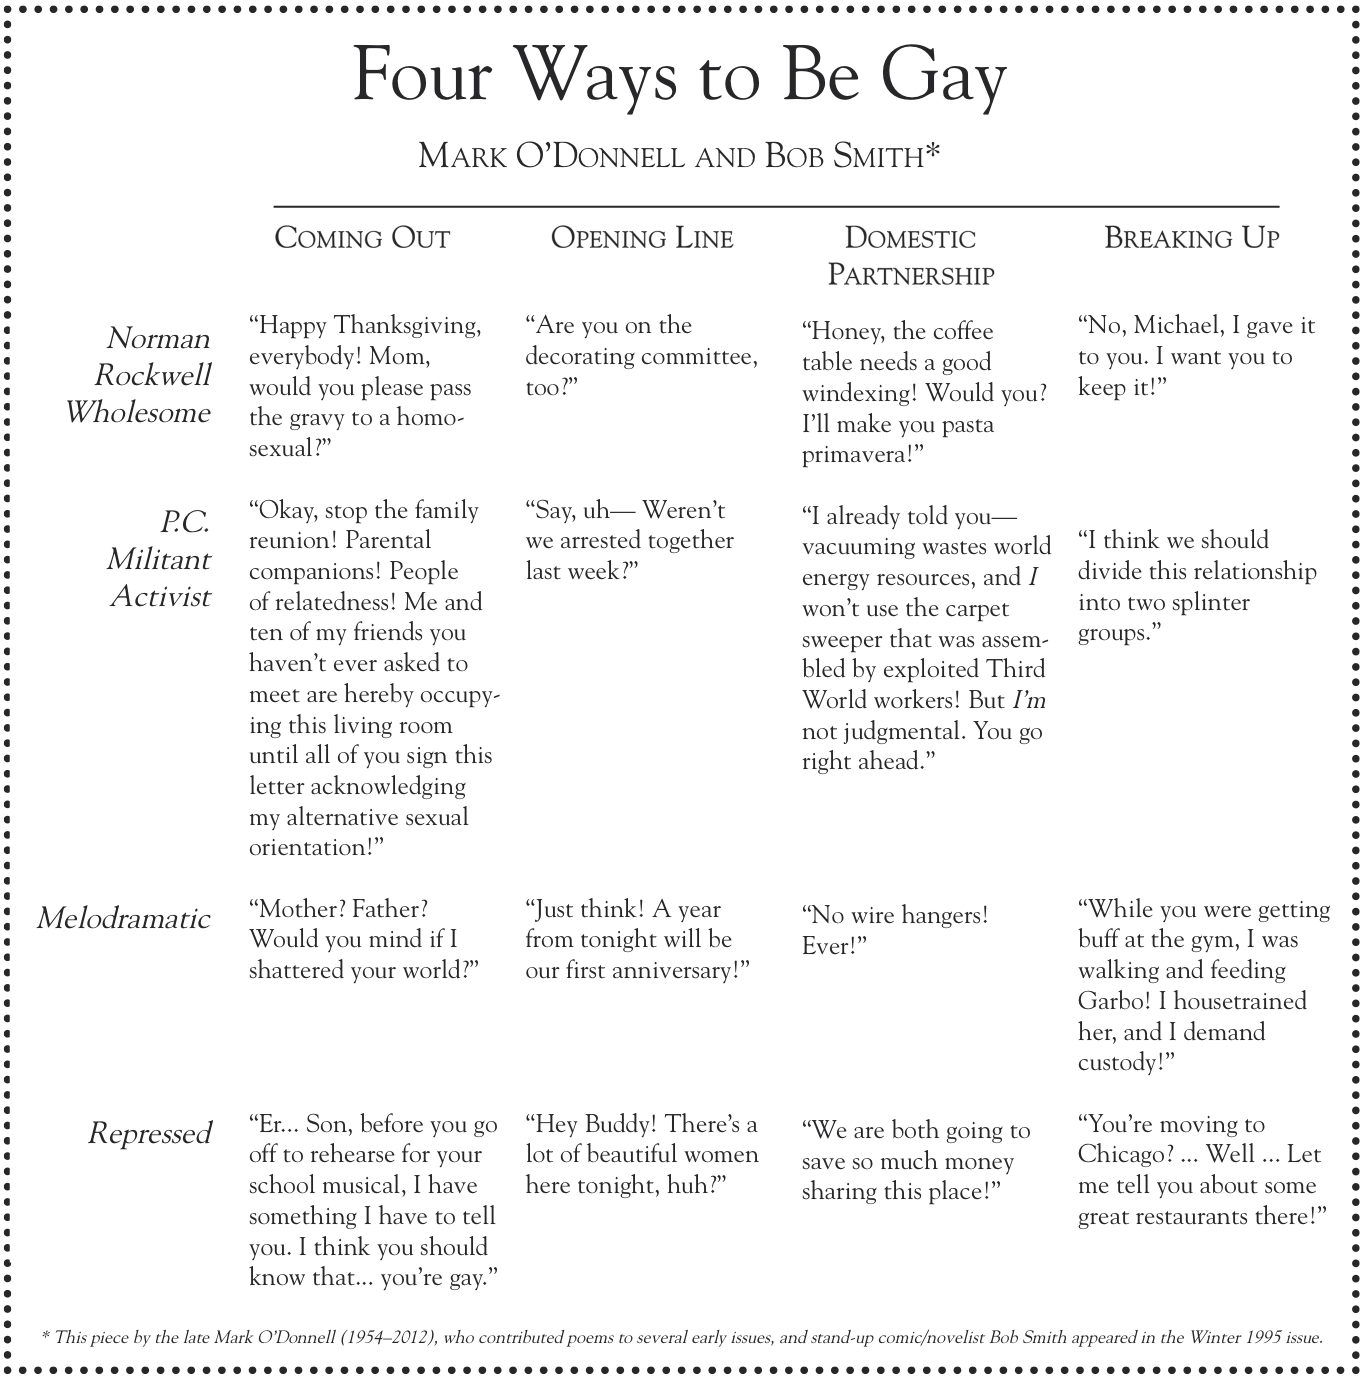 Four Ways to Be Gay